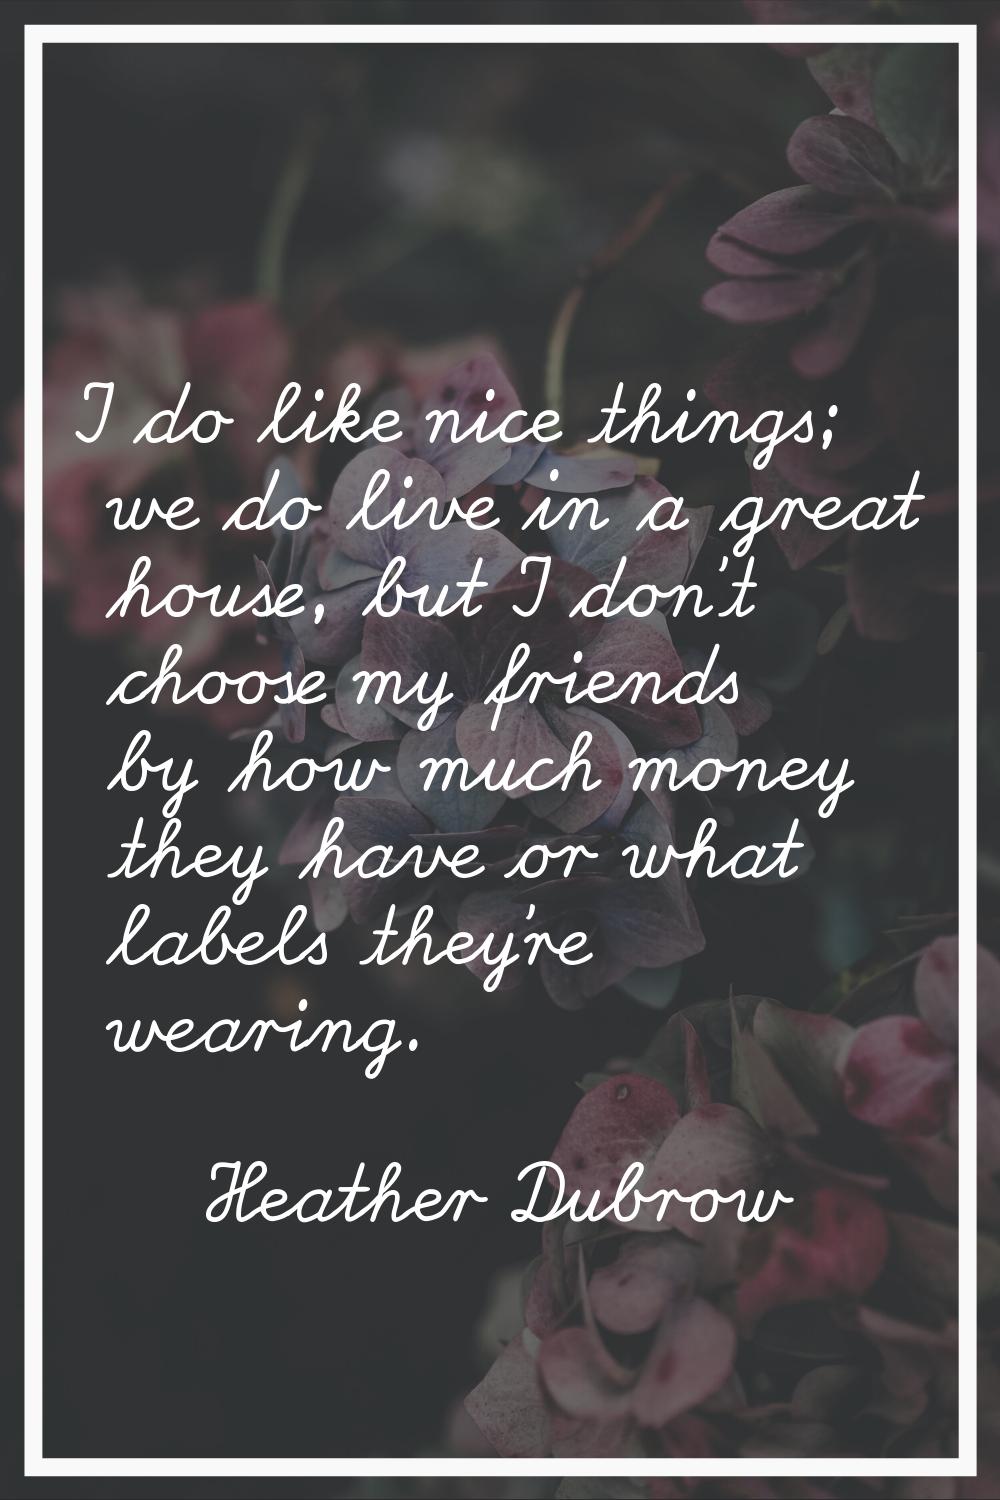 I do like nice things; we do live in a great house, but I don't choose my friends by how much money